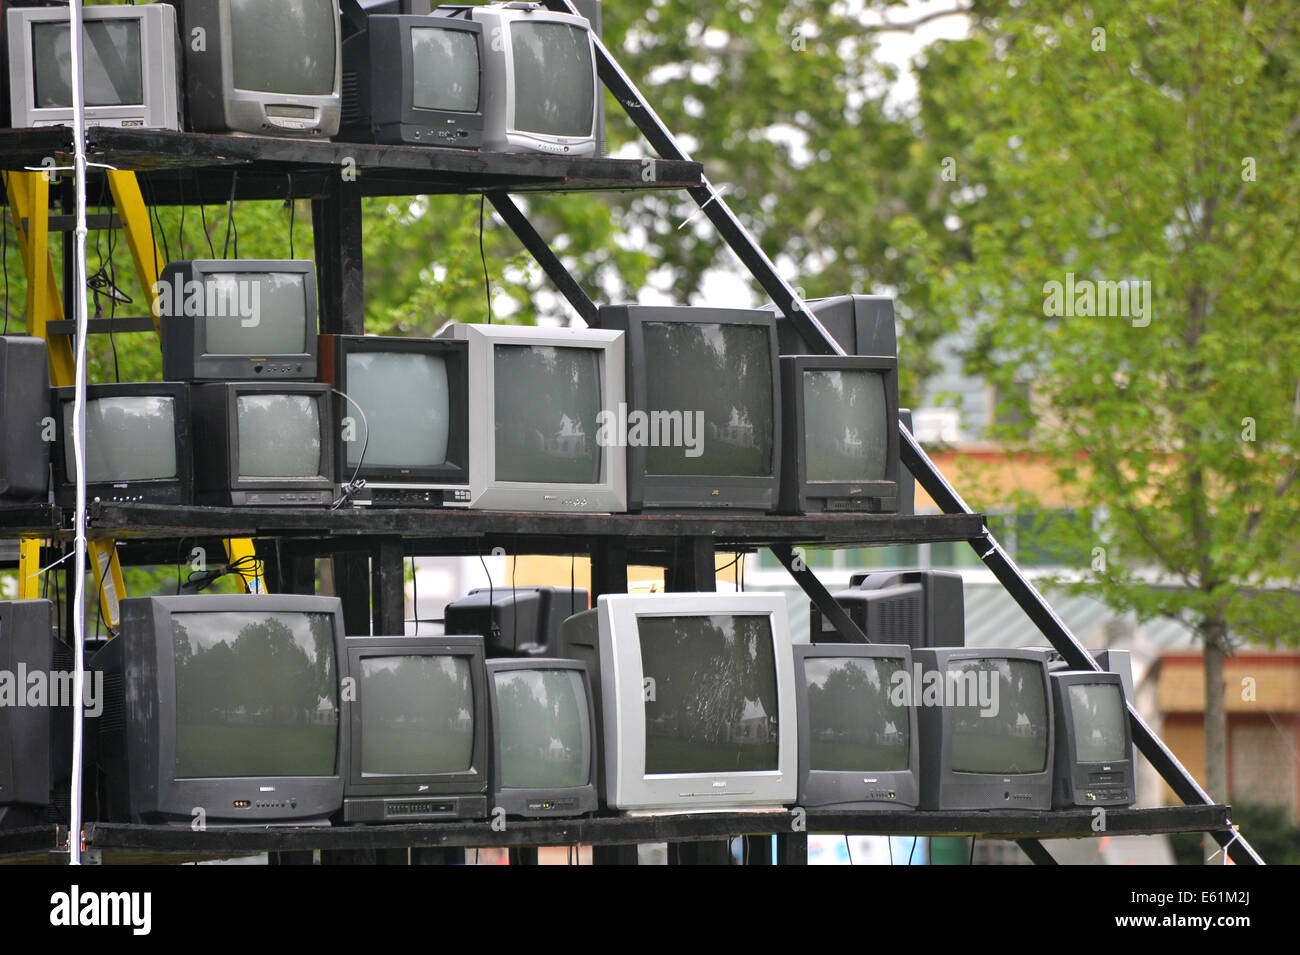 A pyramid of televisions in a park in London, Ontario. Stock Photo